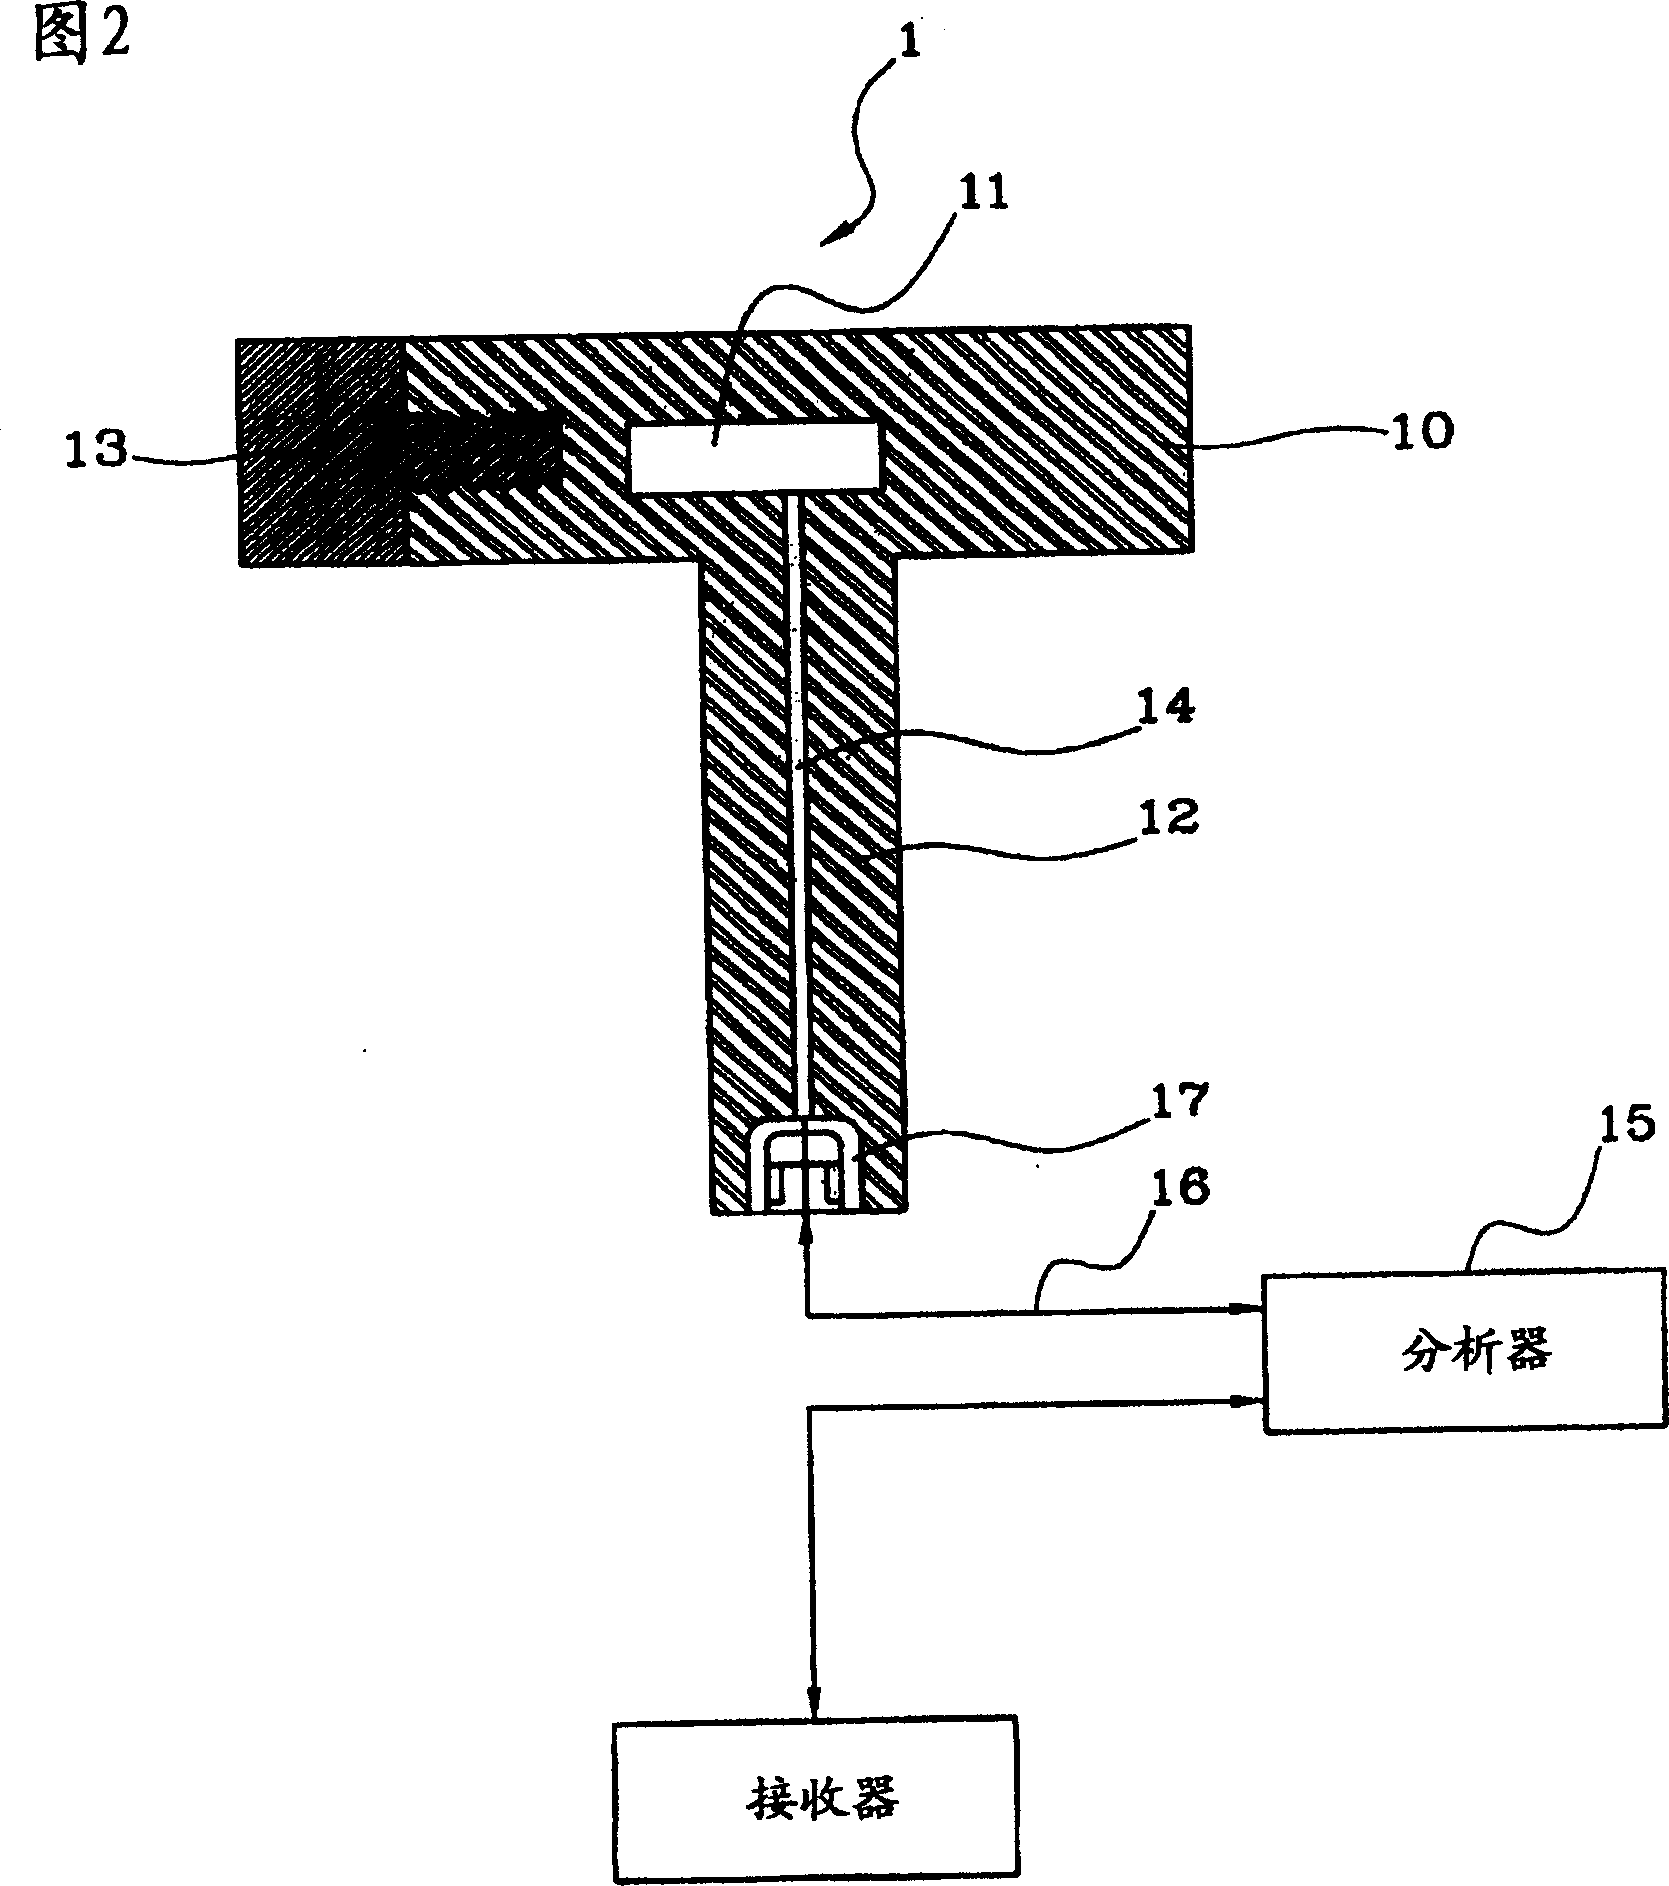 Harmless measuring method and device for analyzing and determining underground pile penetration length